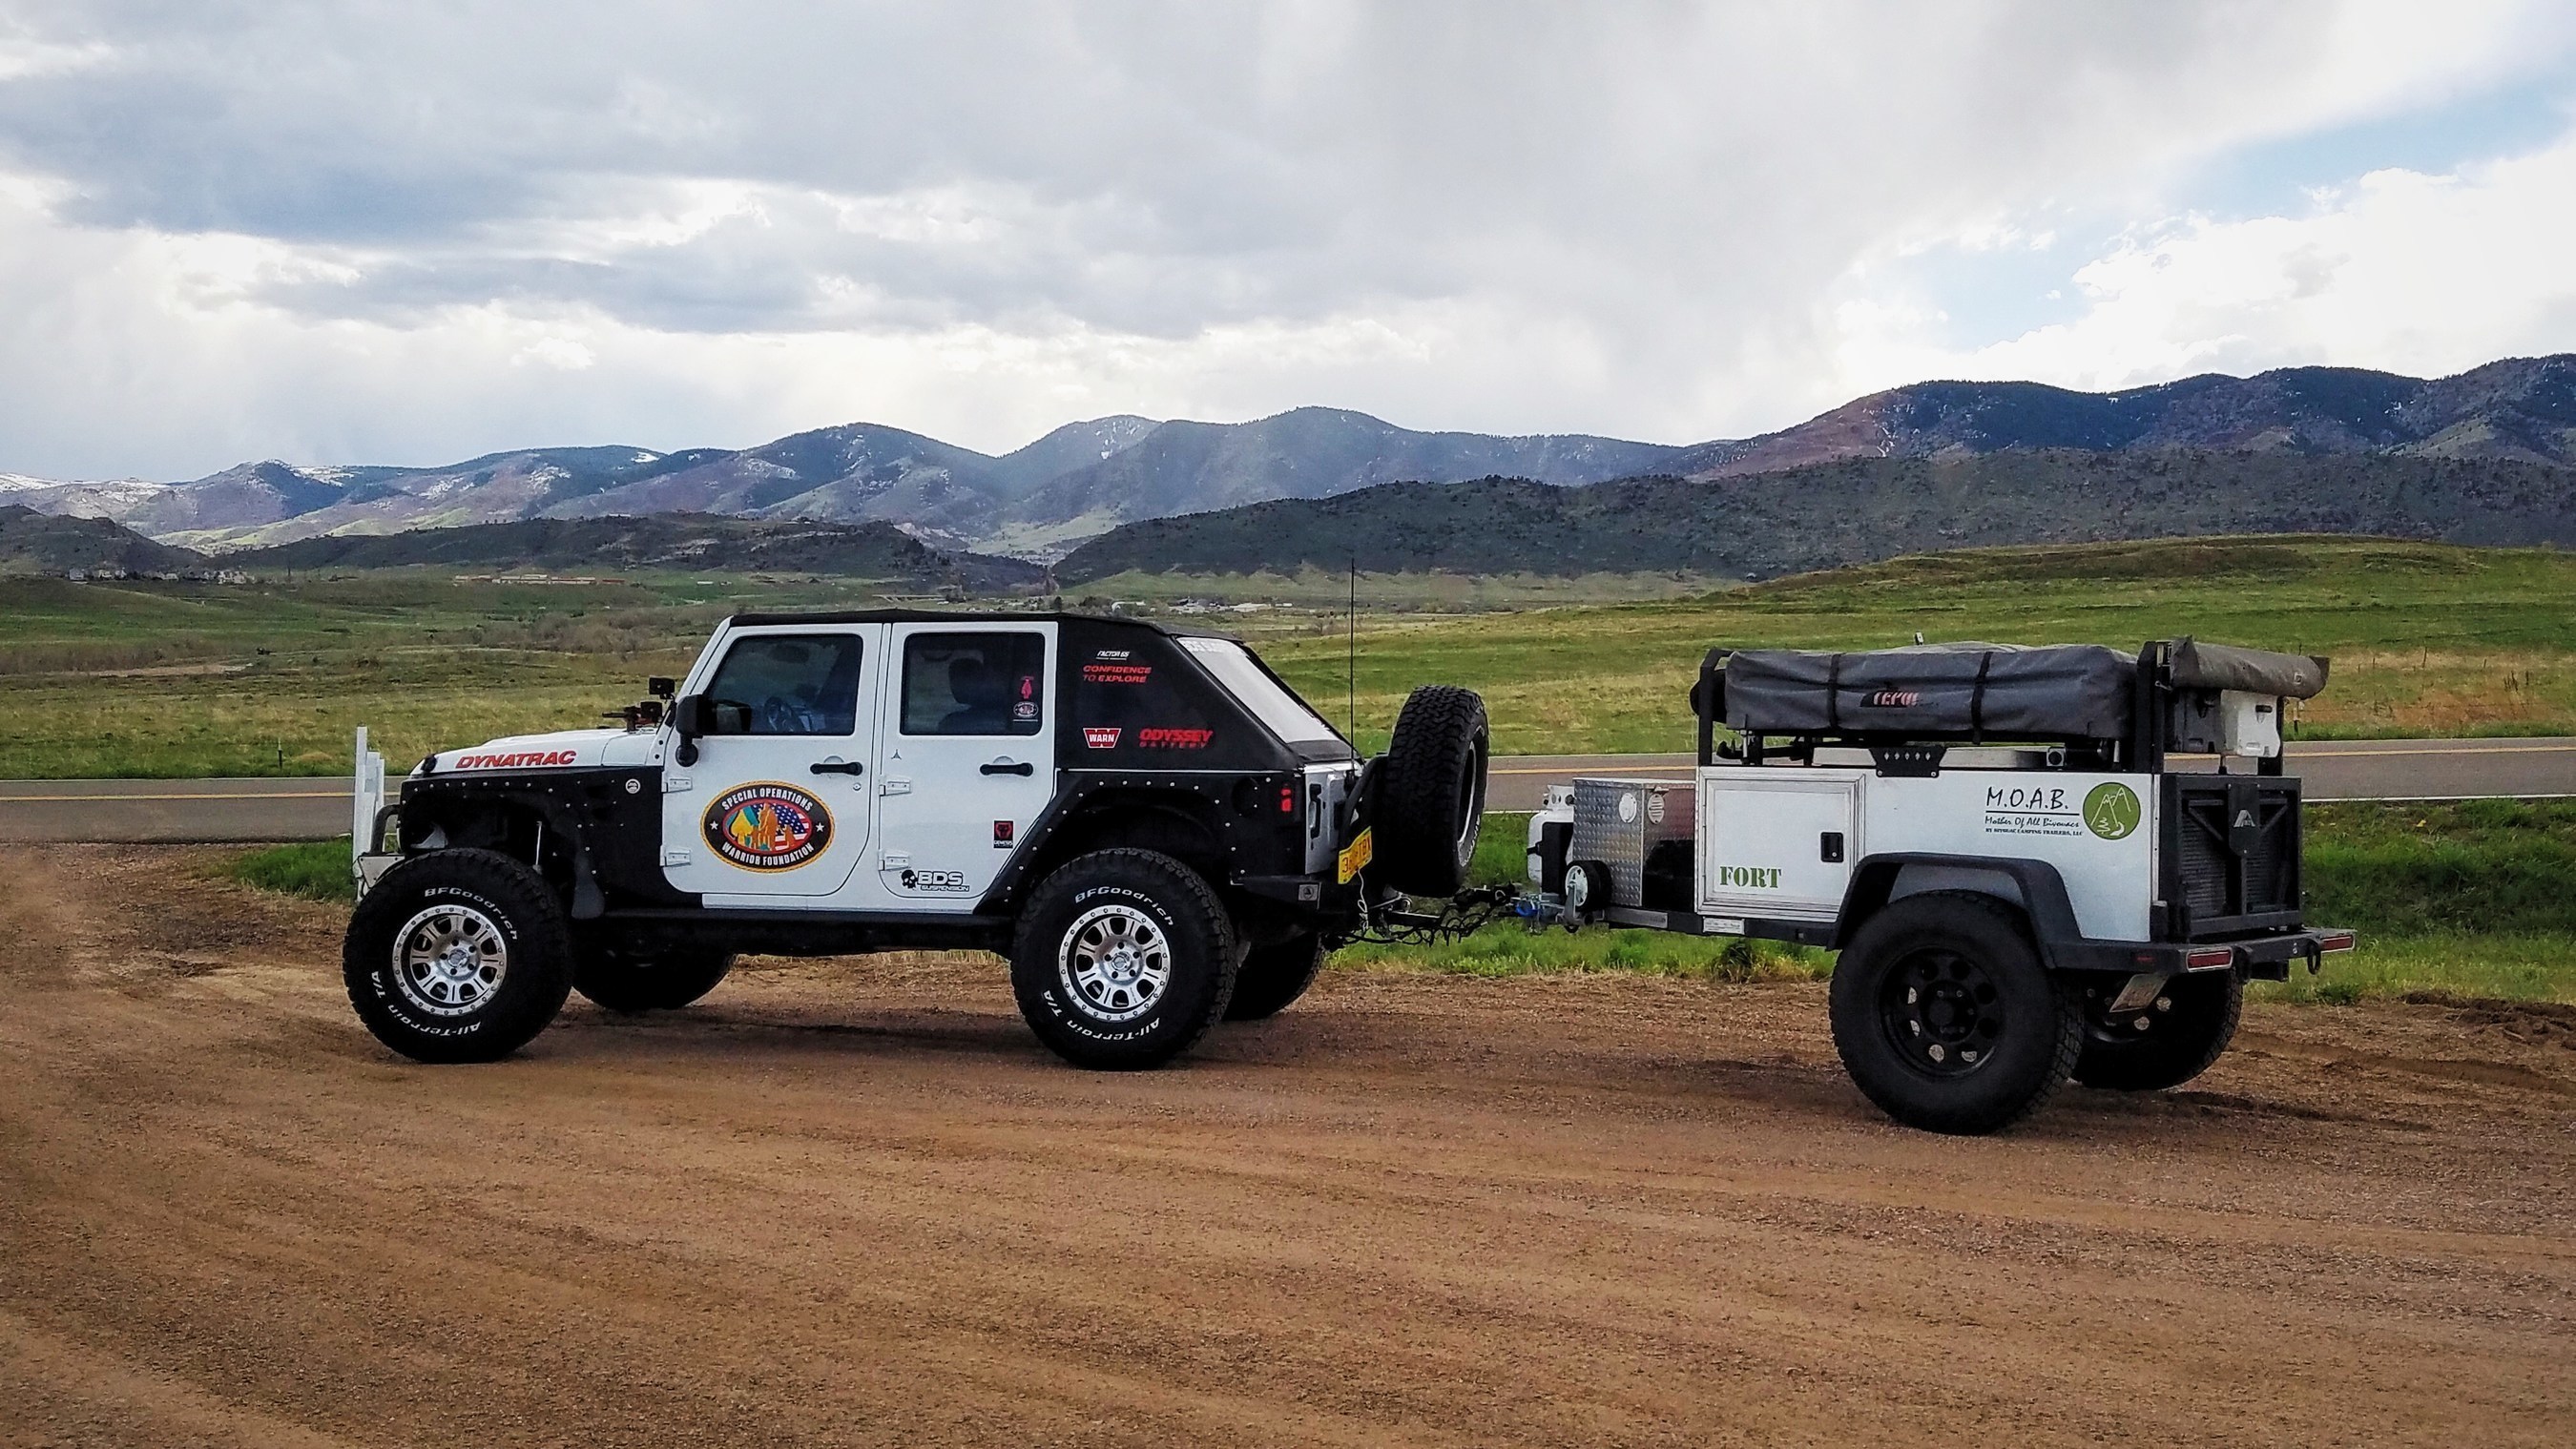 The Warrior Jeep Team was formed in 2015 around support for Special Operations U.S. troops who were wounded or died in combat, with the purpose of raising awareness and generating support for these veterans and their families who often do not receive government benefits.